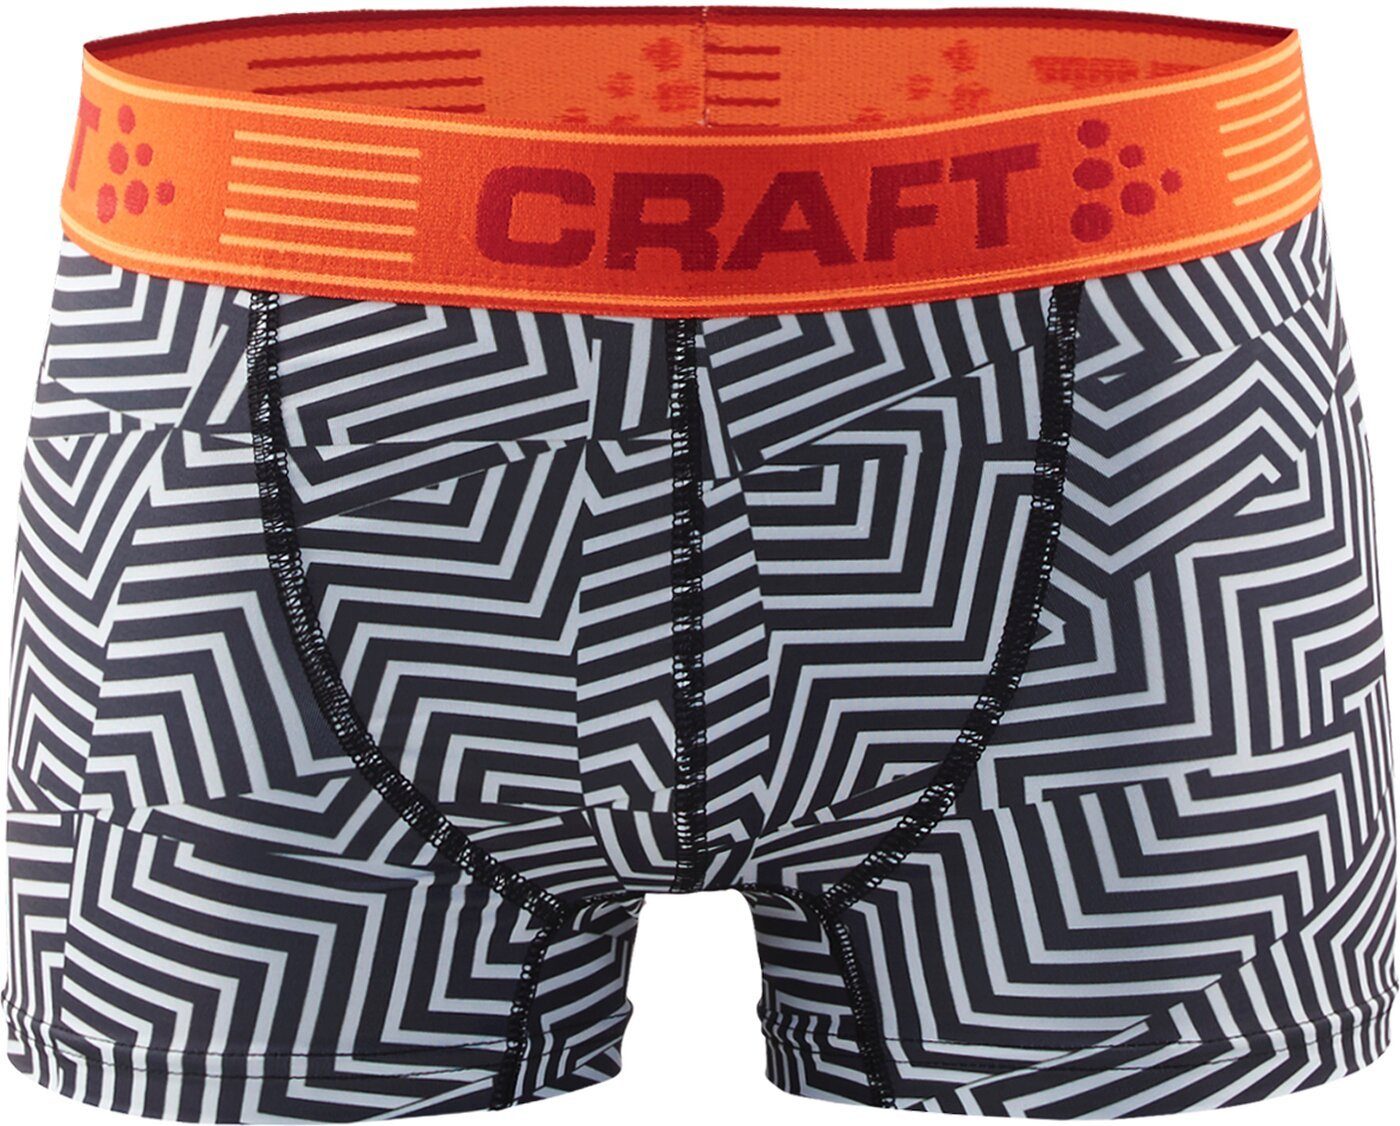 Craft Boxershorts Greatness Boxers 3-Inch M